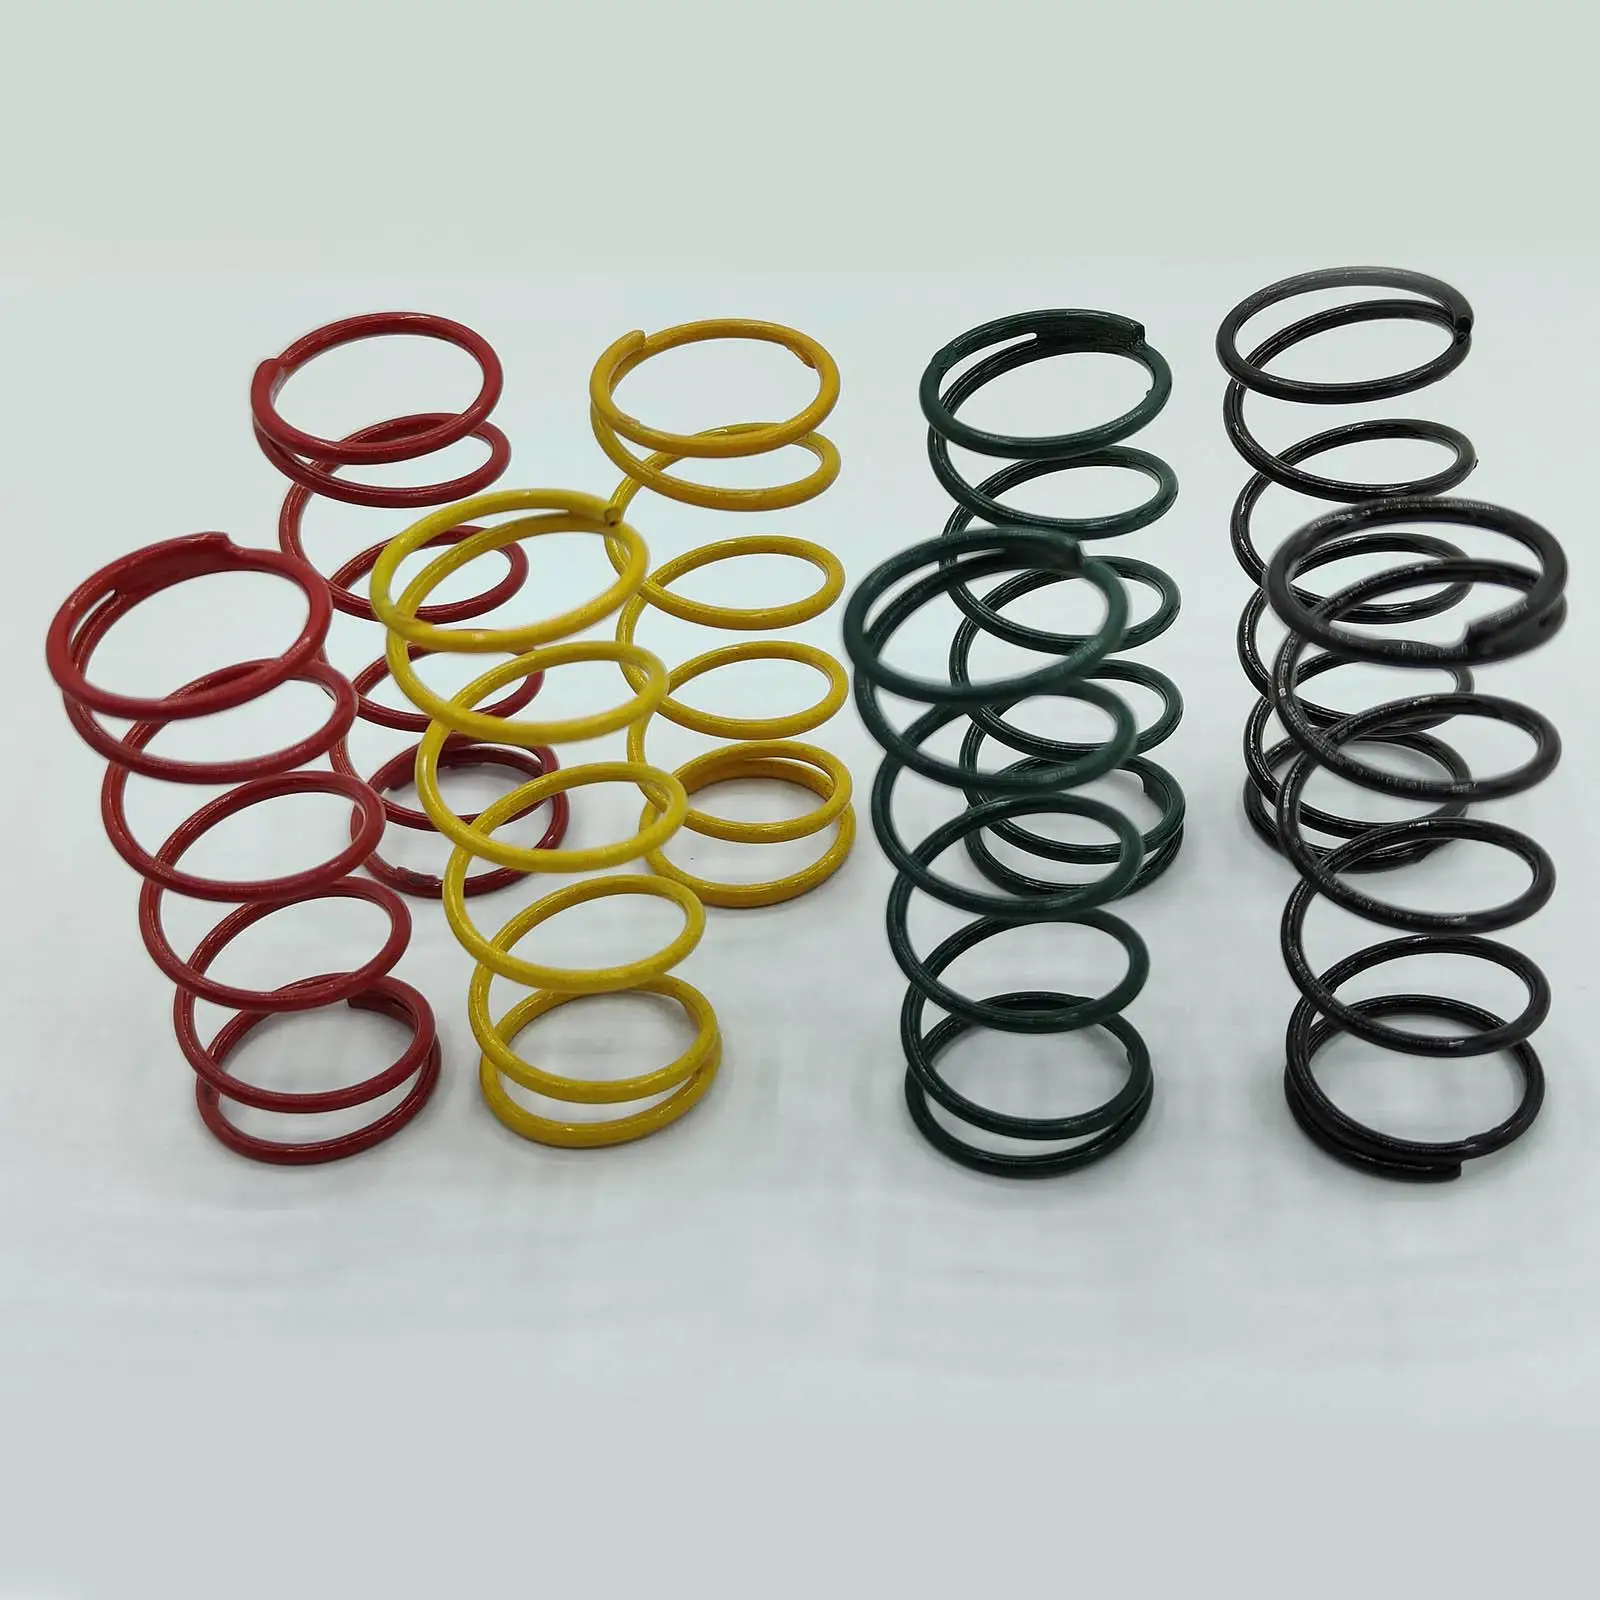 8x Big Bore Shock Spring Set 80mm Iron Car Shock Springs for RC Vehicles for Traxxas Truck